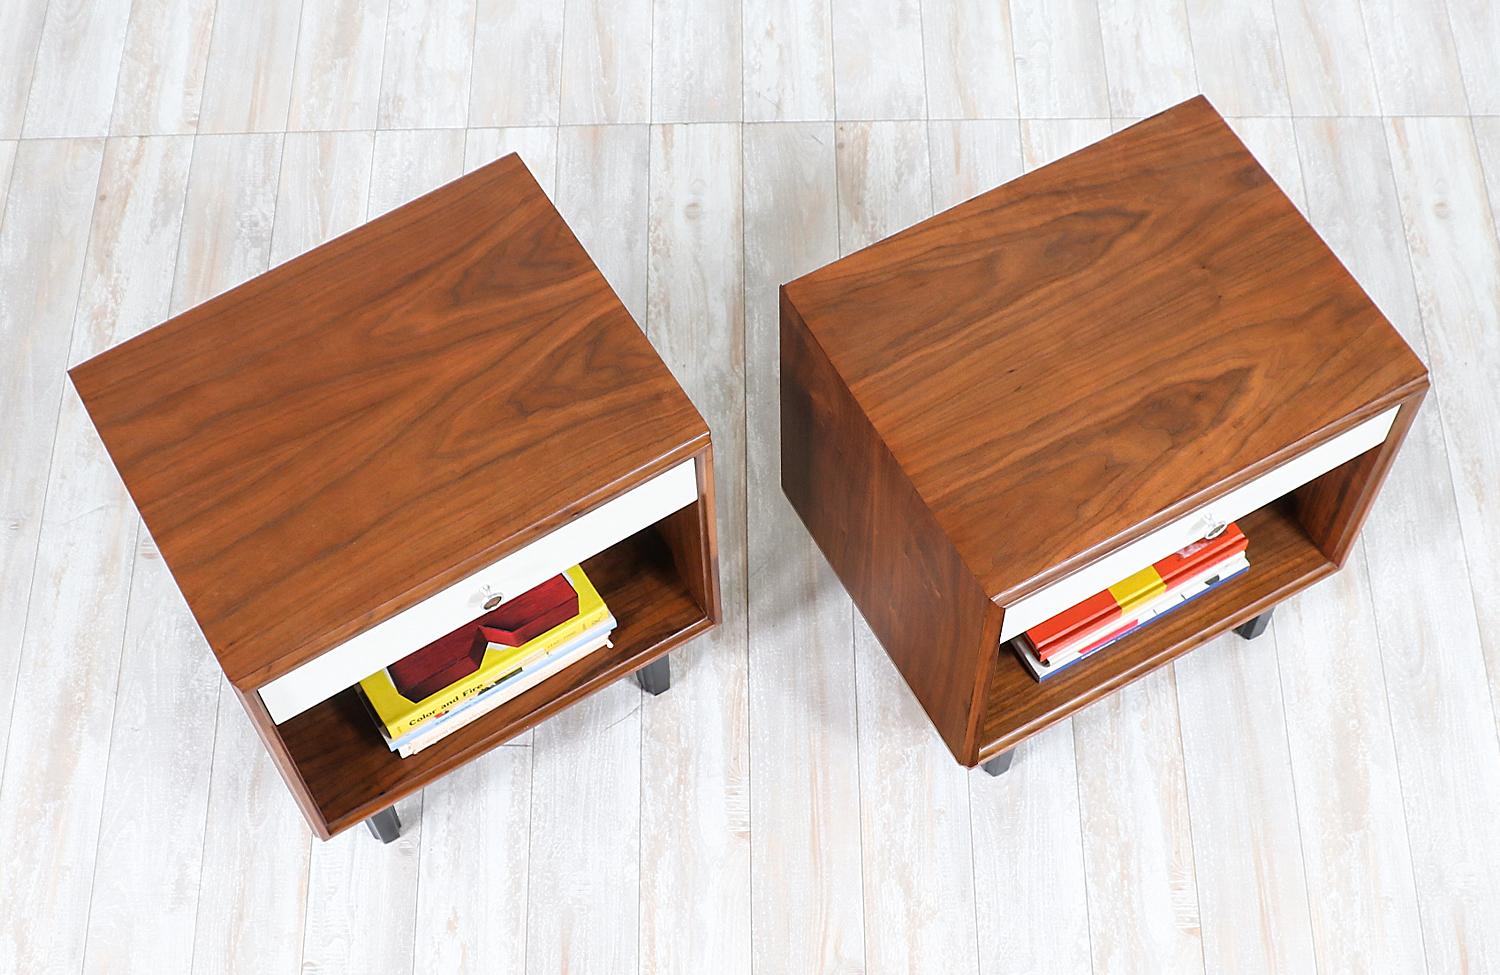 Mid-20th Century Milo Baughman Two-Tone Lacquered and Walnut Nightstands for Glenn of California